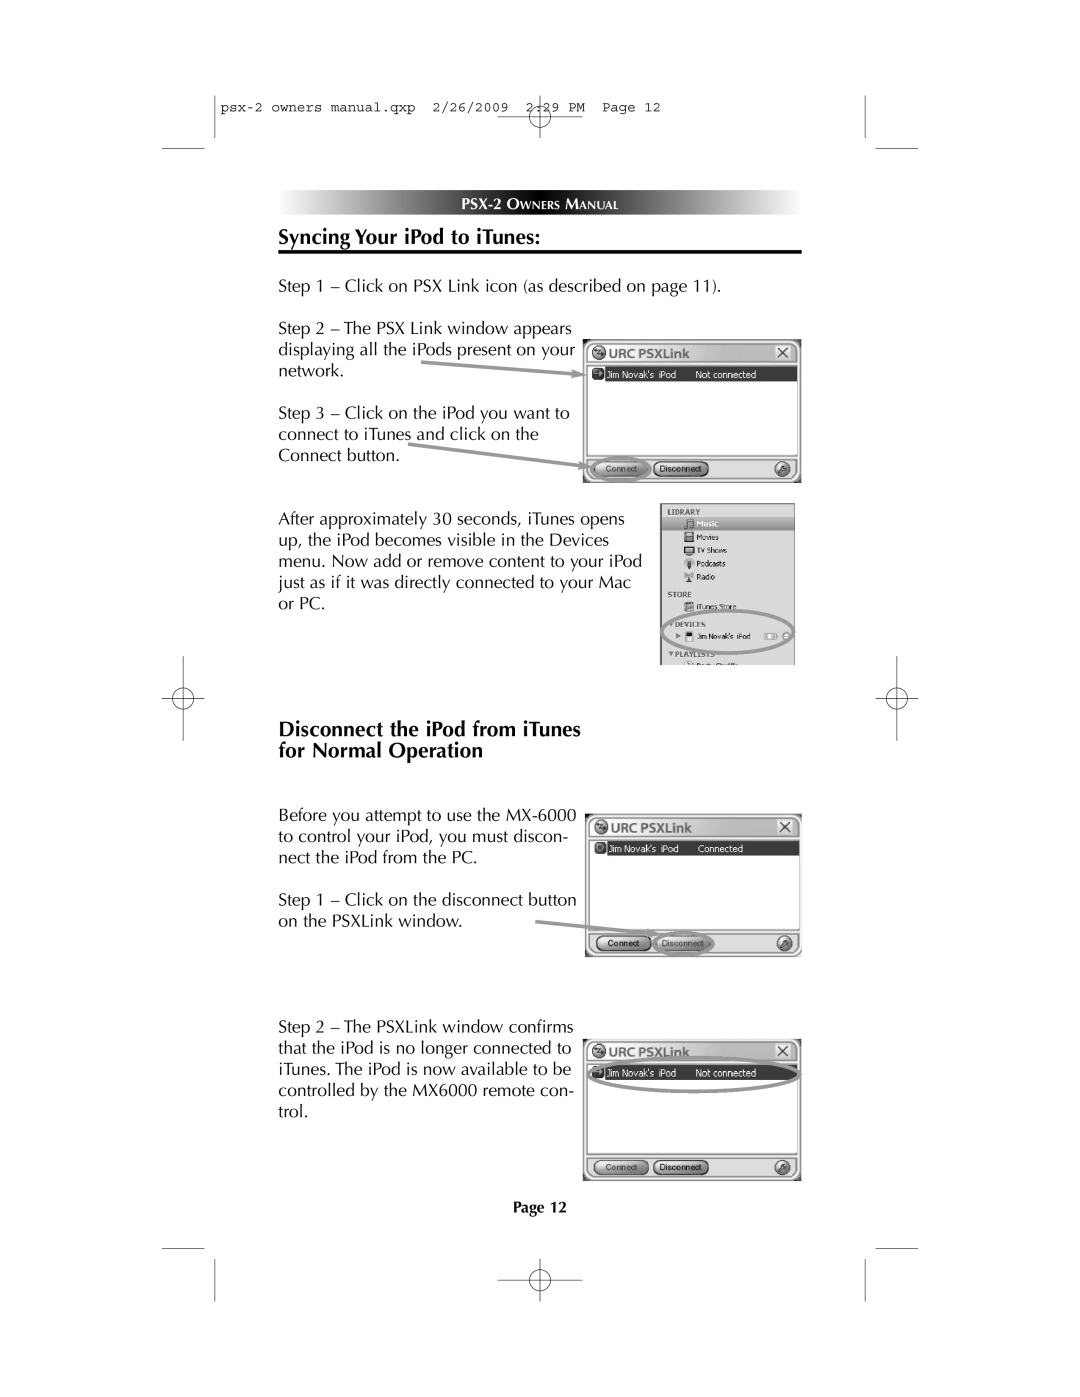 Universal PSX-2 owner manual Syncing Your iPod to iTunes, Disconnect the iPod from iTunes for Normal Operation 